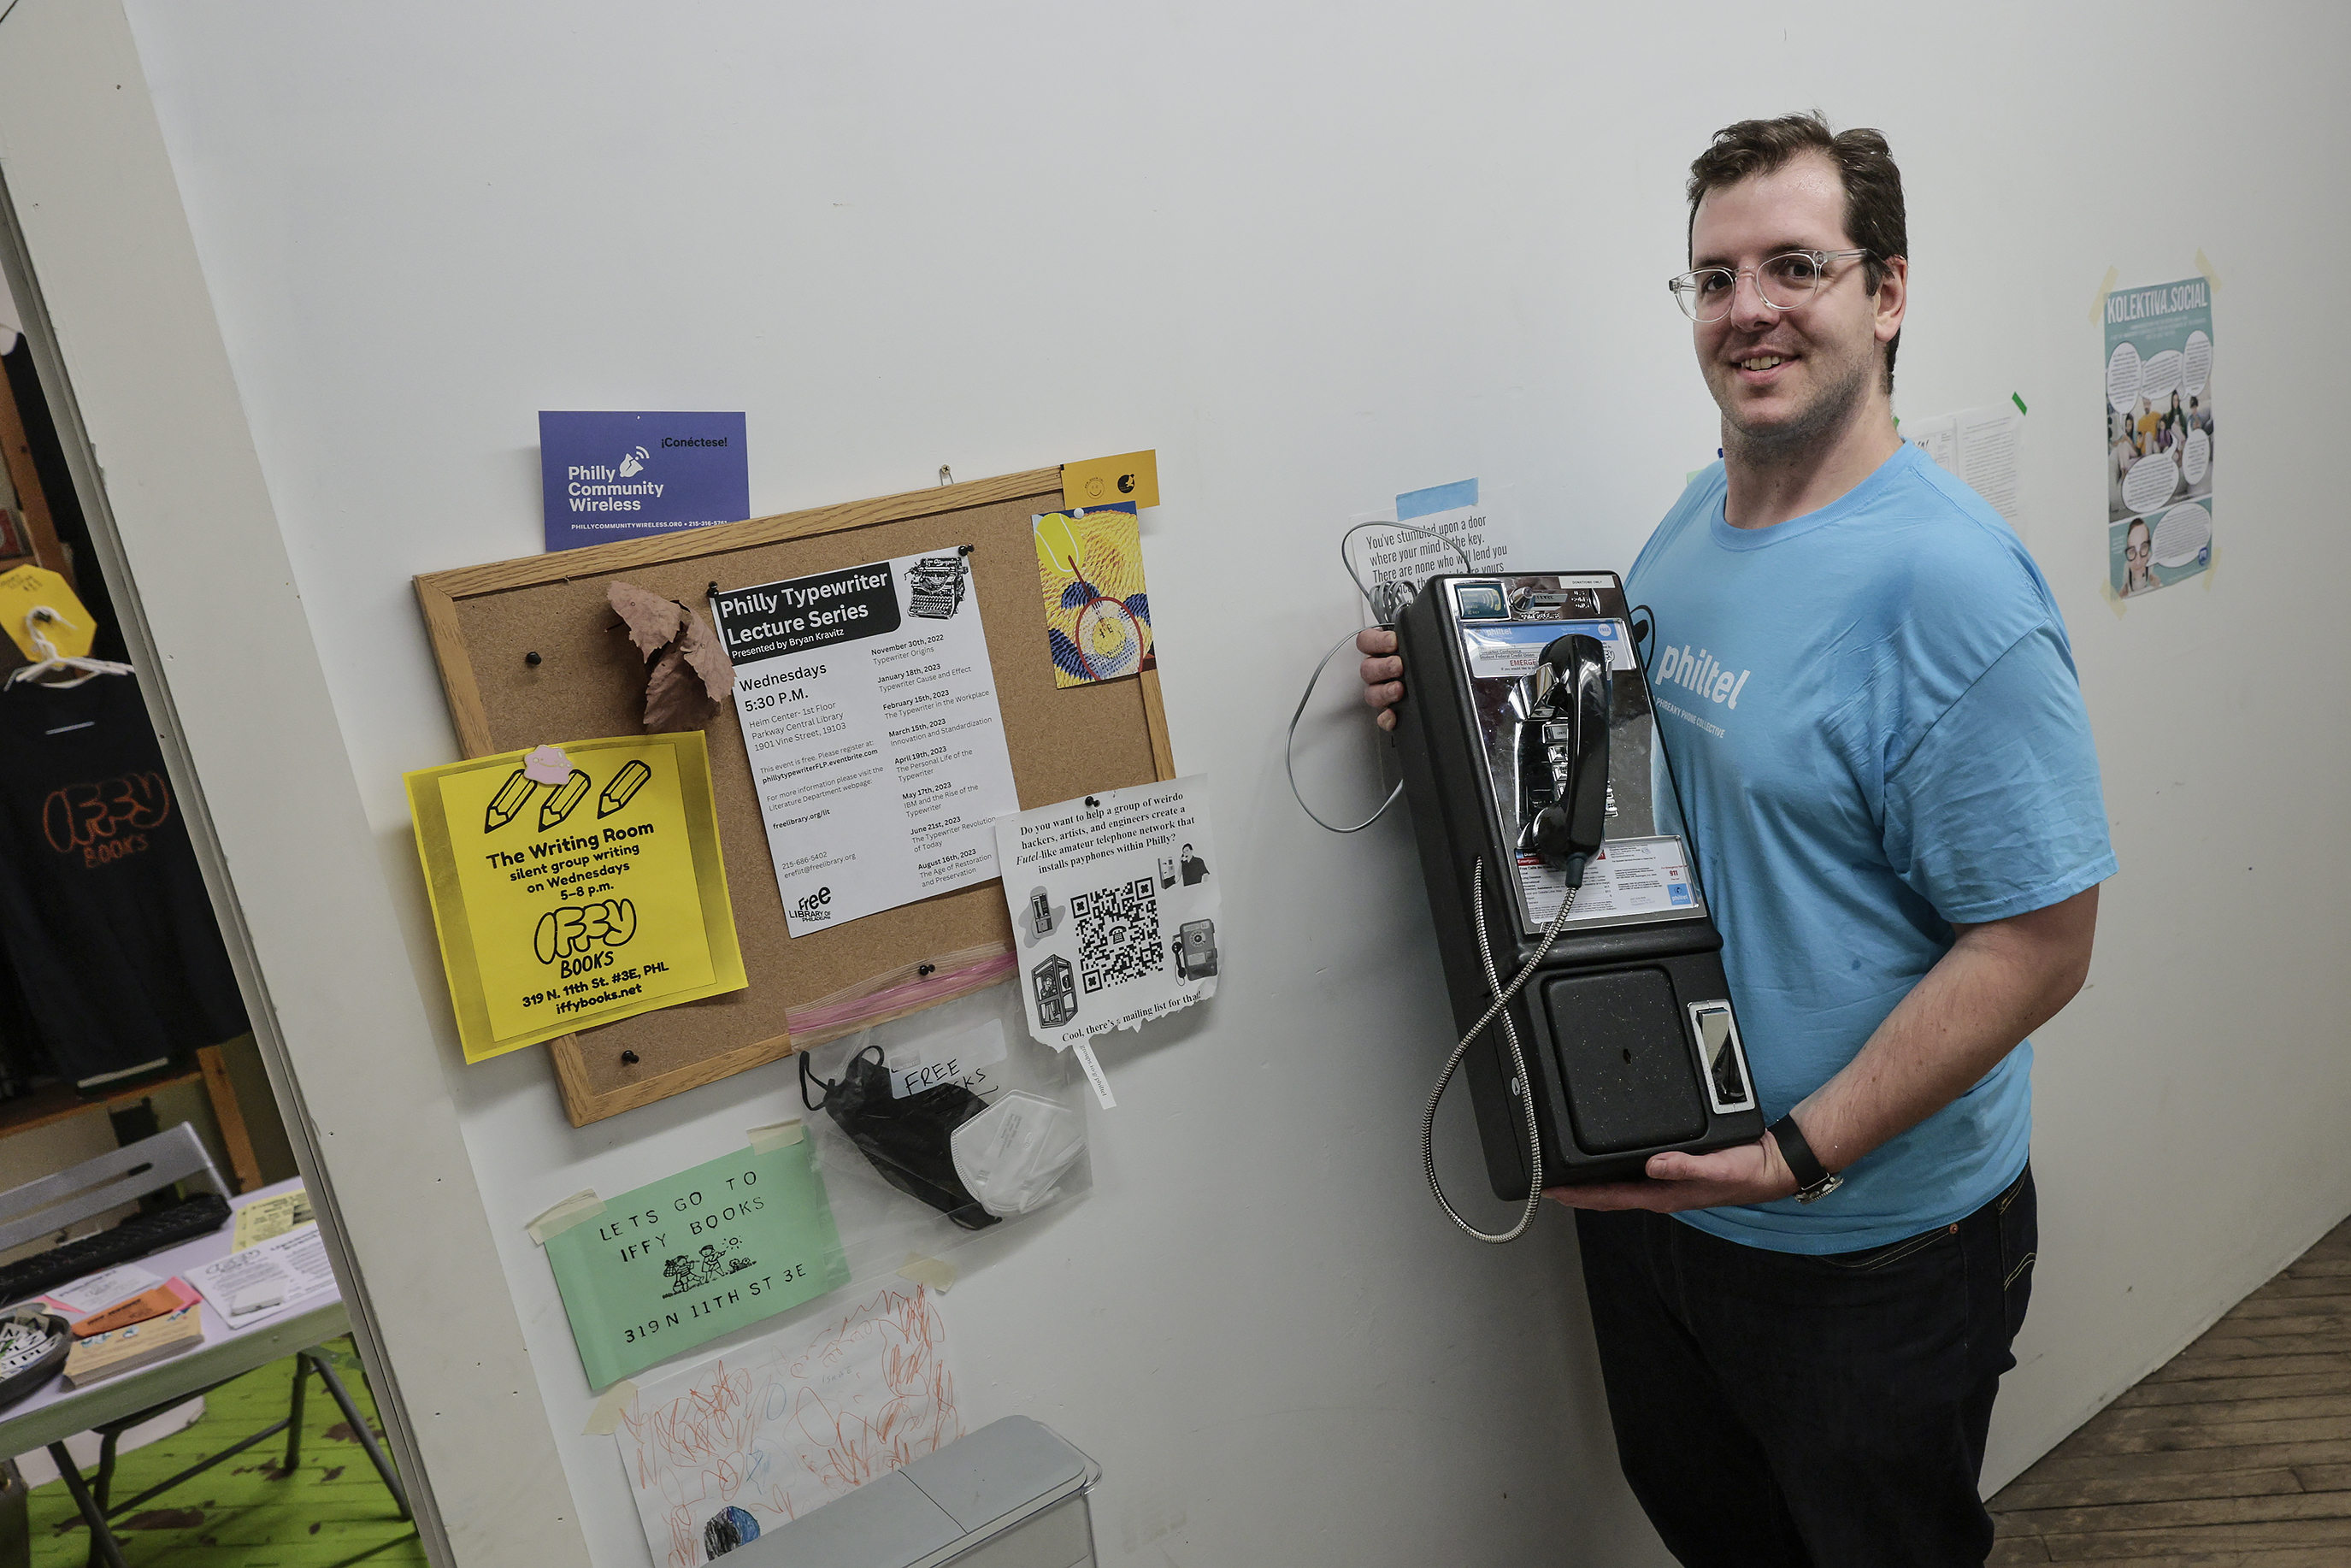 PhilTel wants to bring pay phones back to Philadelphia, for free calls